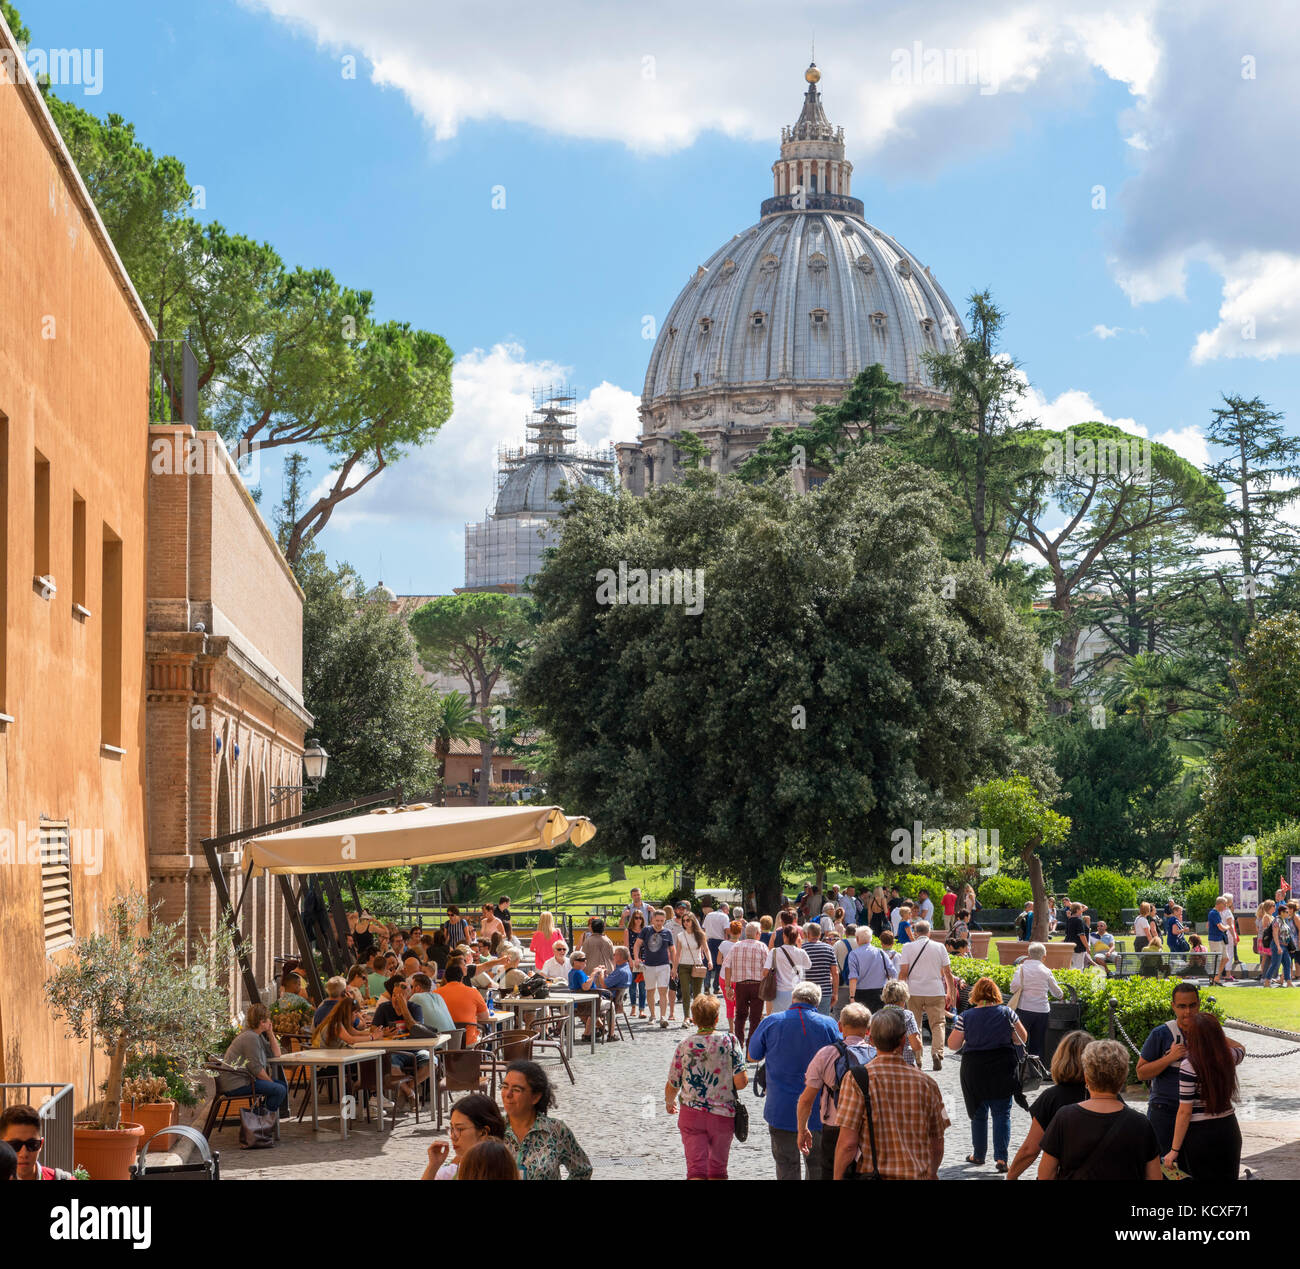 The dome of St Peter's Basilica from the gardens of the Vatican Museums, Vatican City, Rome, Italy Stock Photo